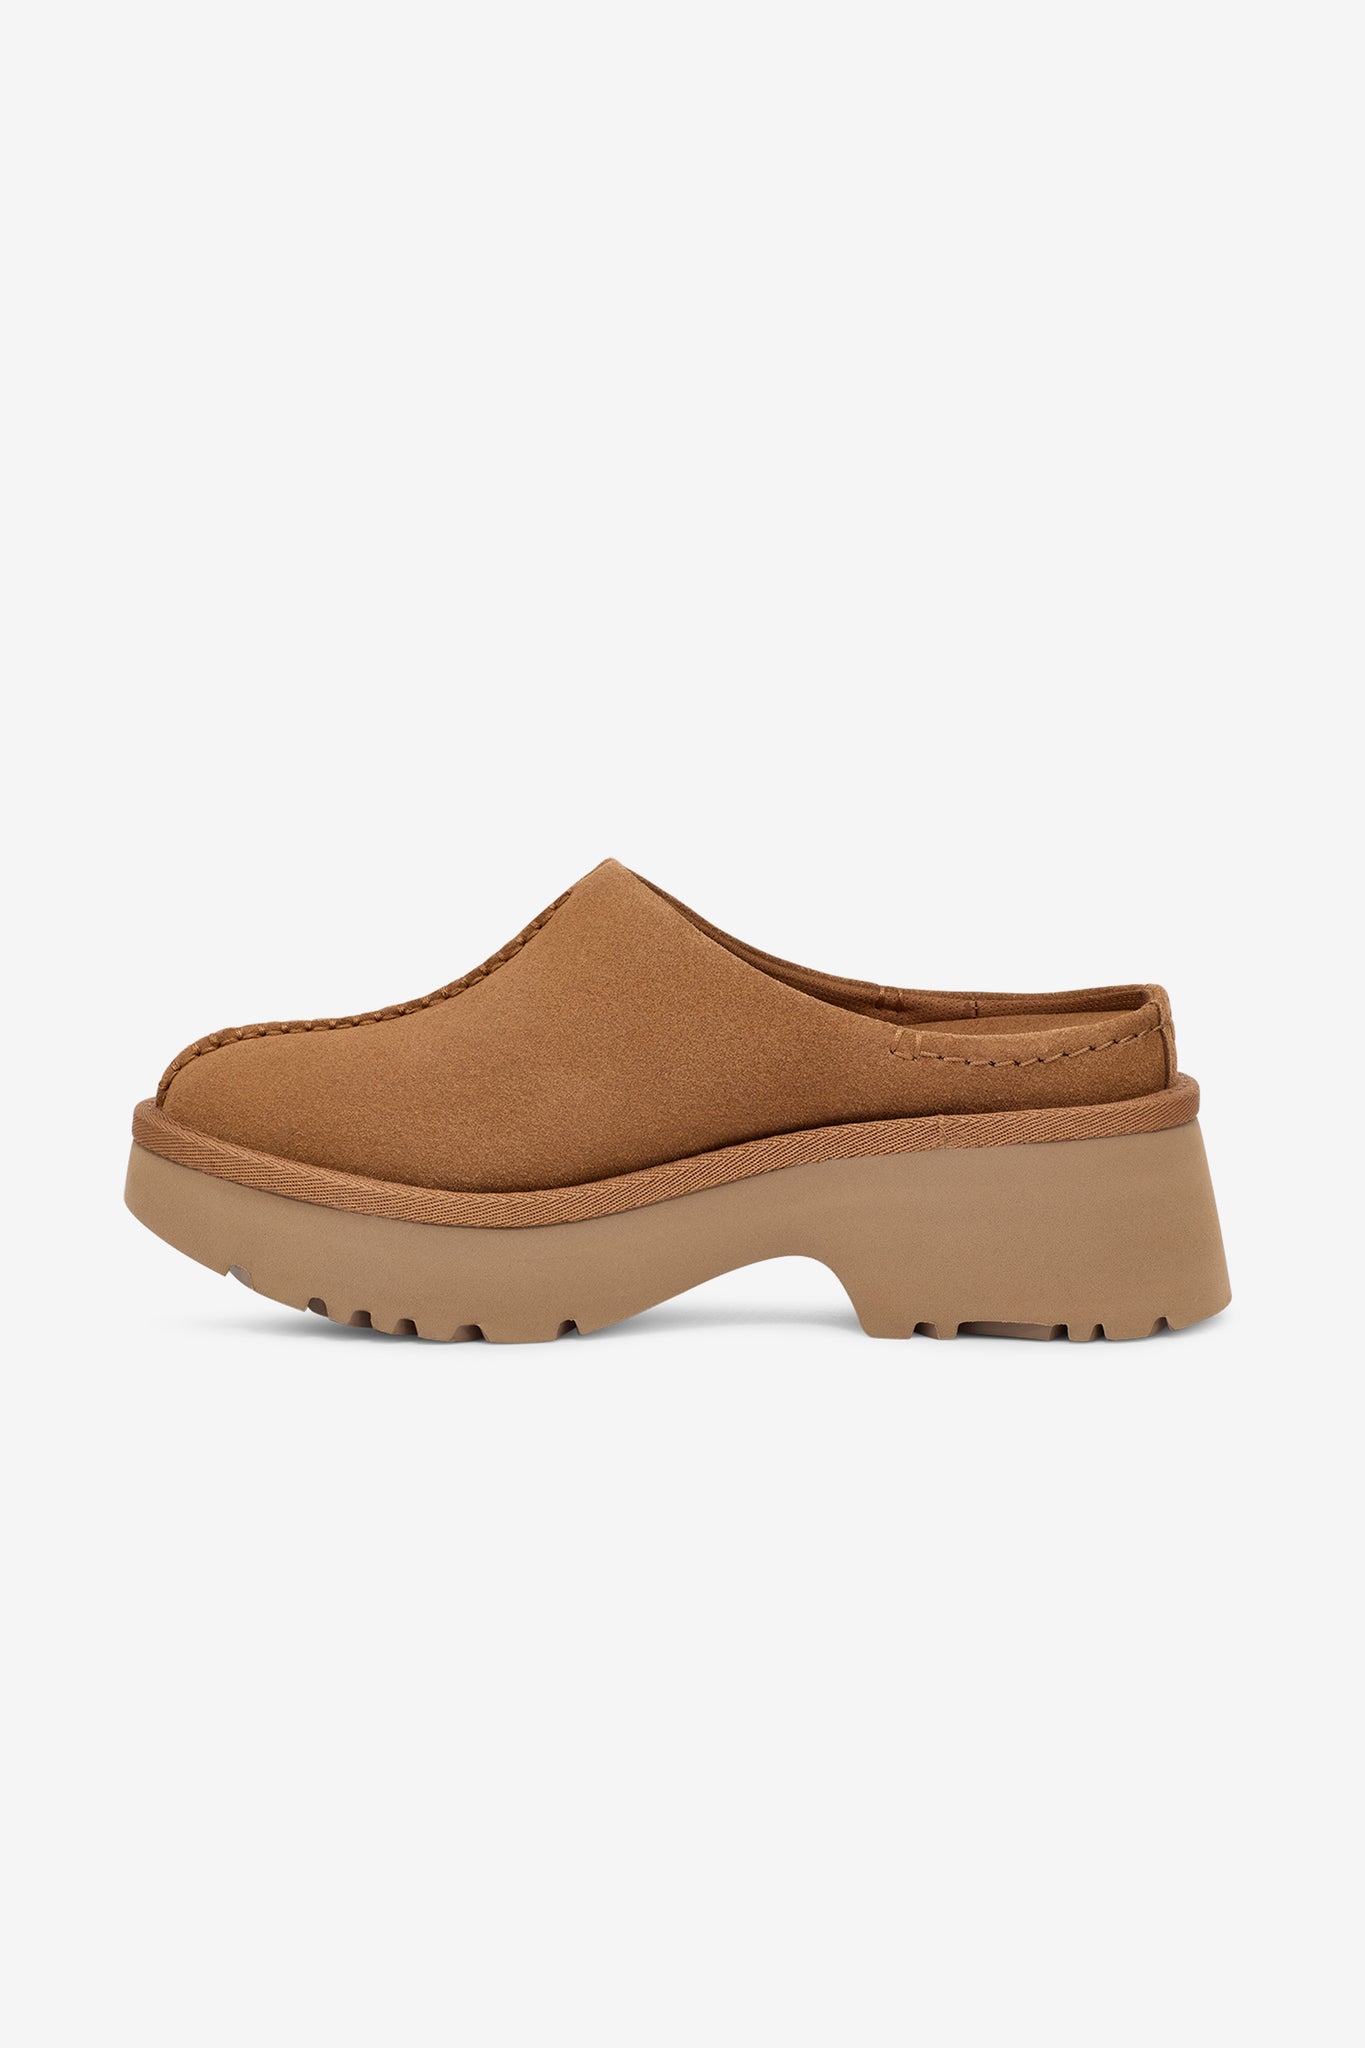 UGG Women's New Heights Clog in Chestnut